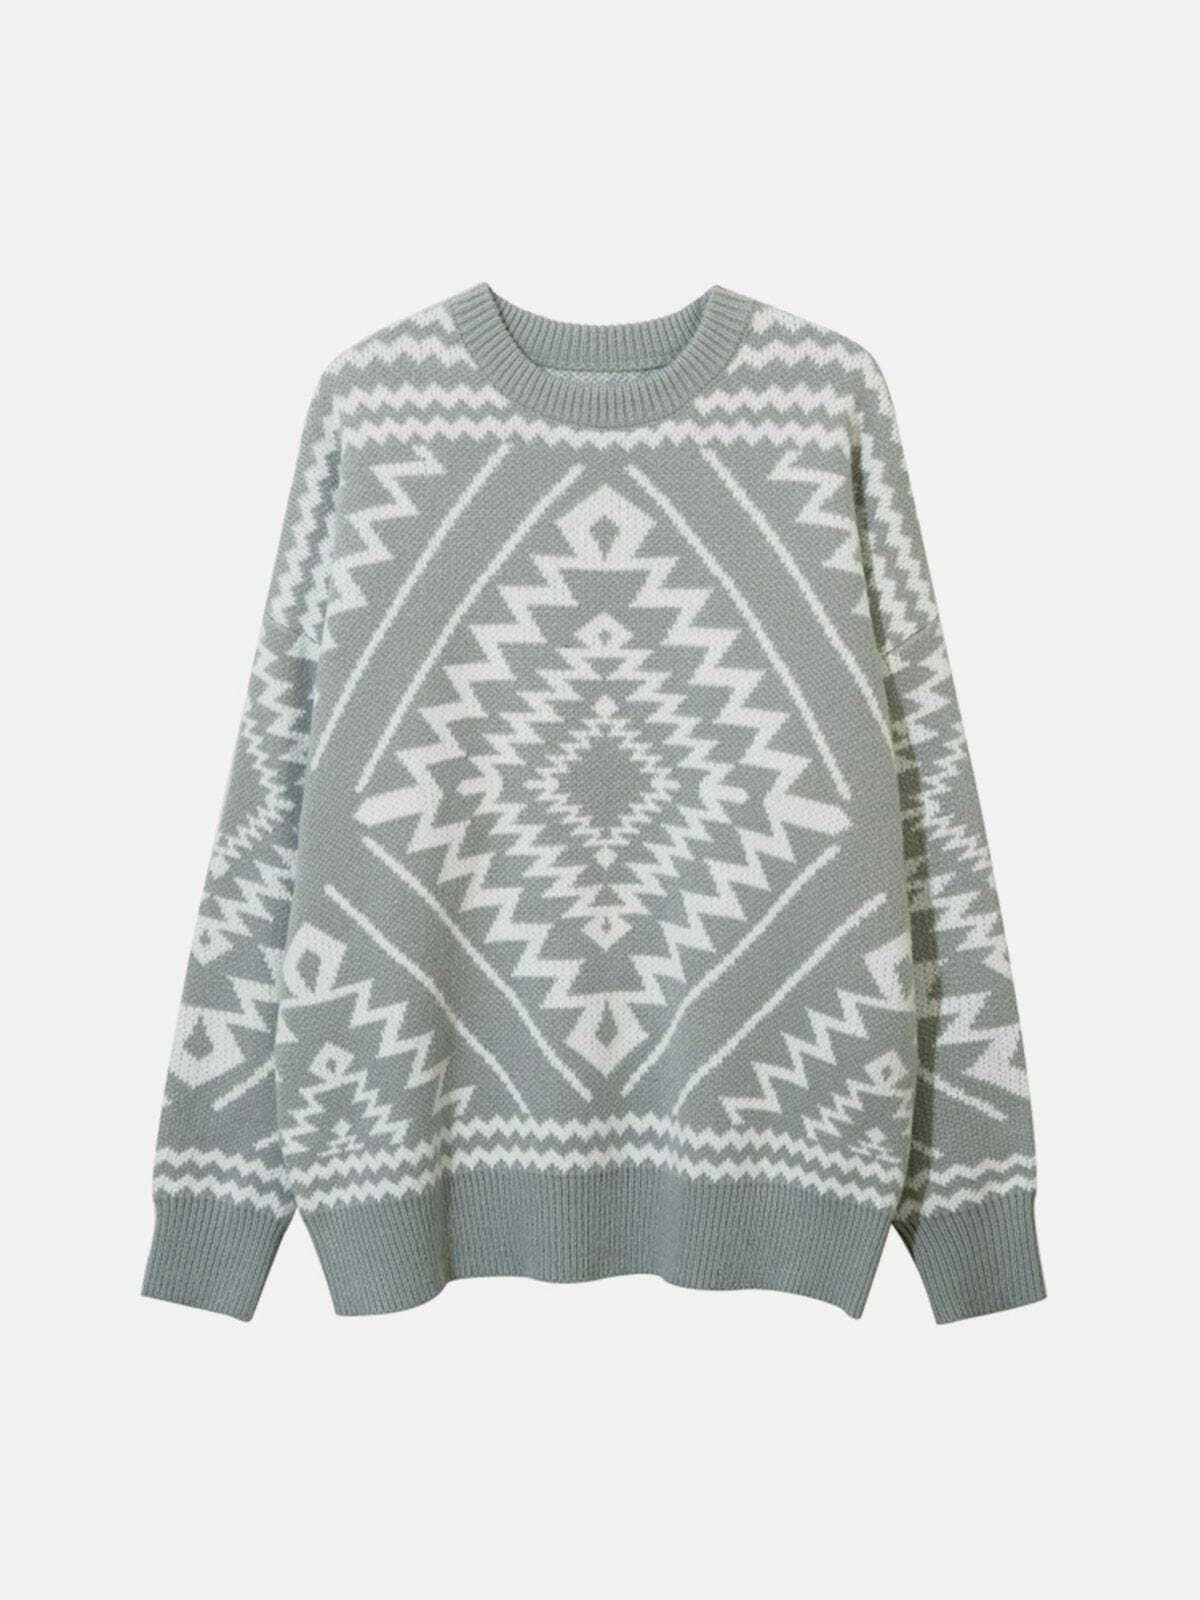 totem print graphic sweater edgy y2k streetwear 3057